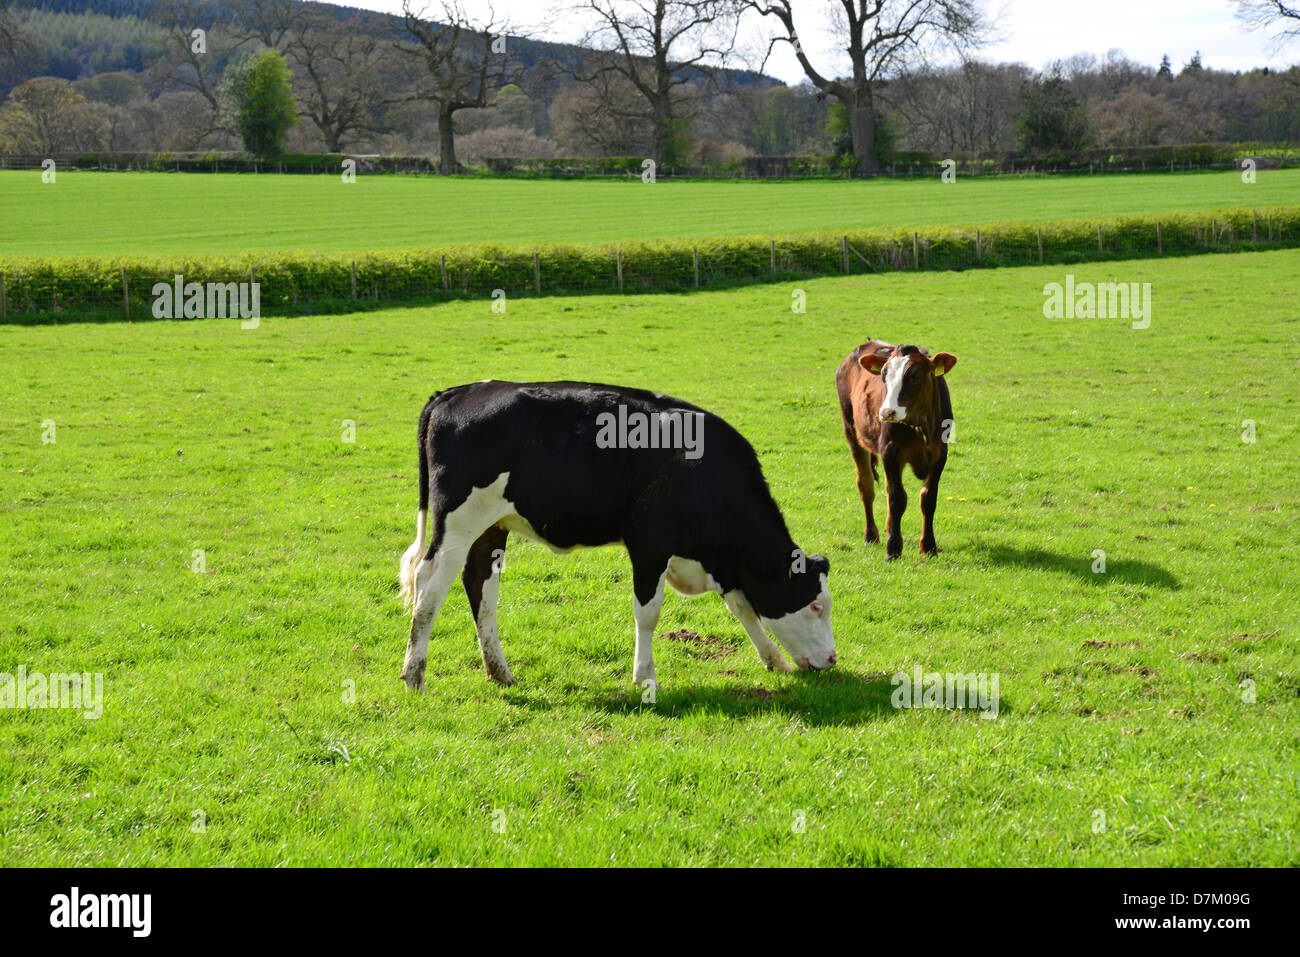 Young beef calves in field near Ludlow, Shropshire, England, United Kingdom Stock Photo